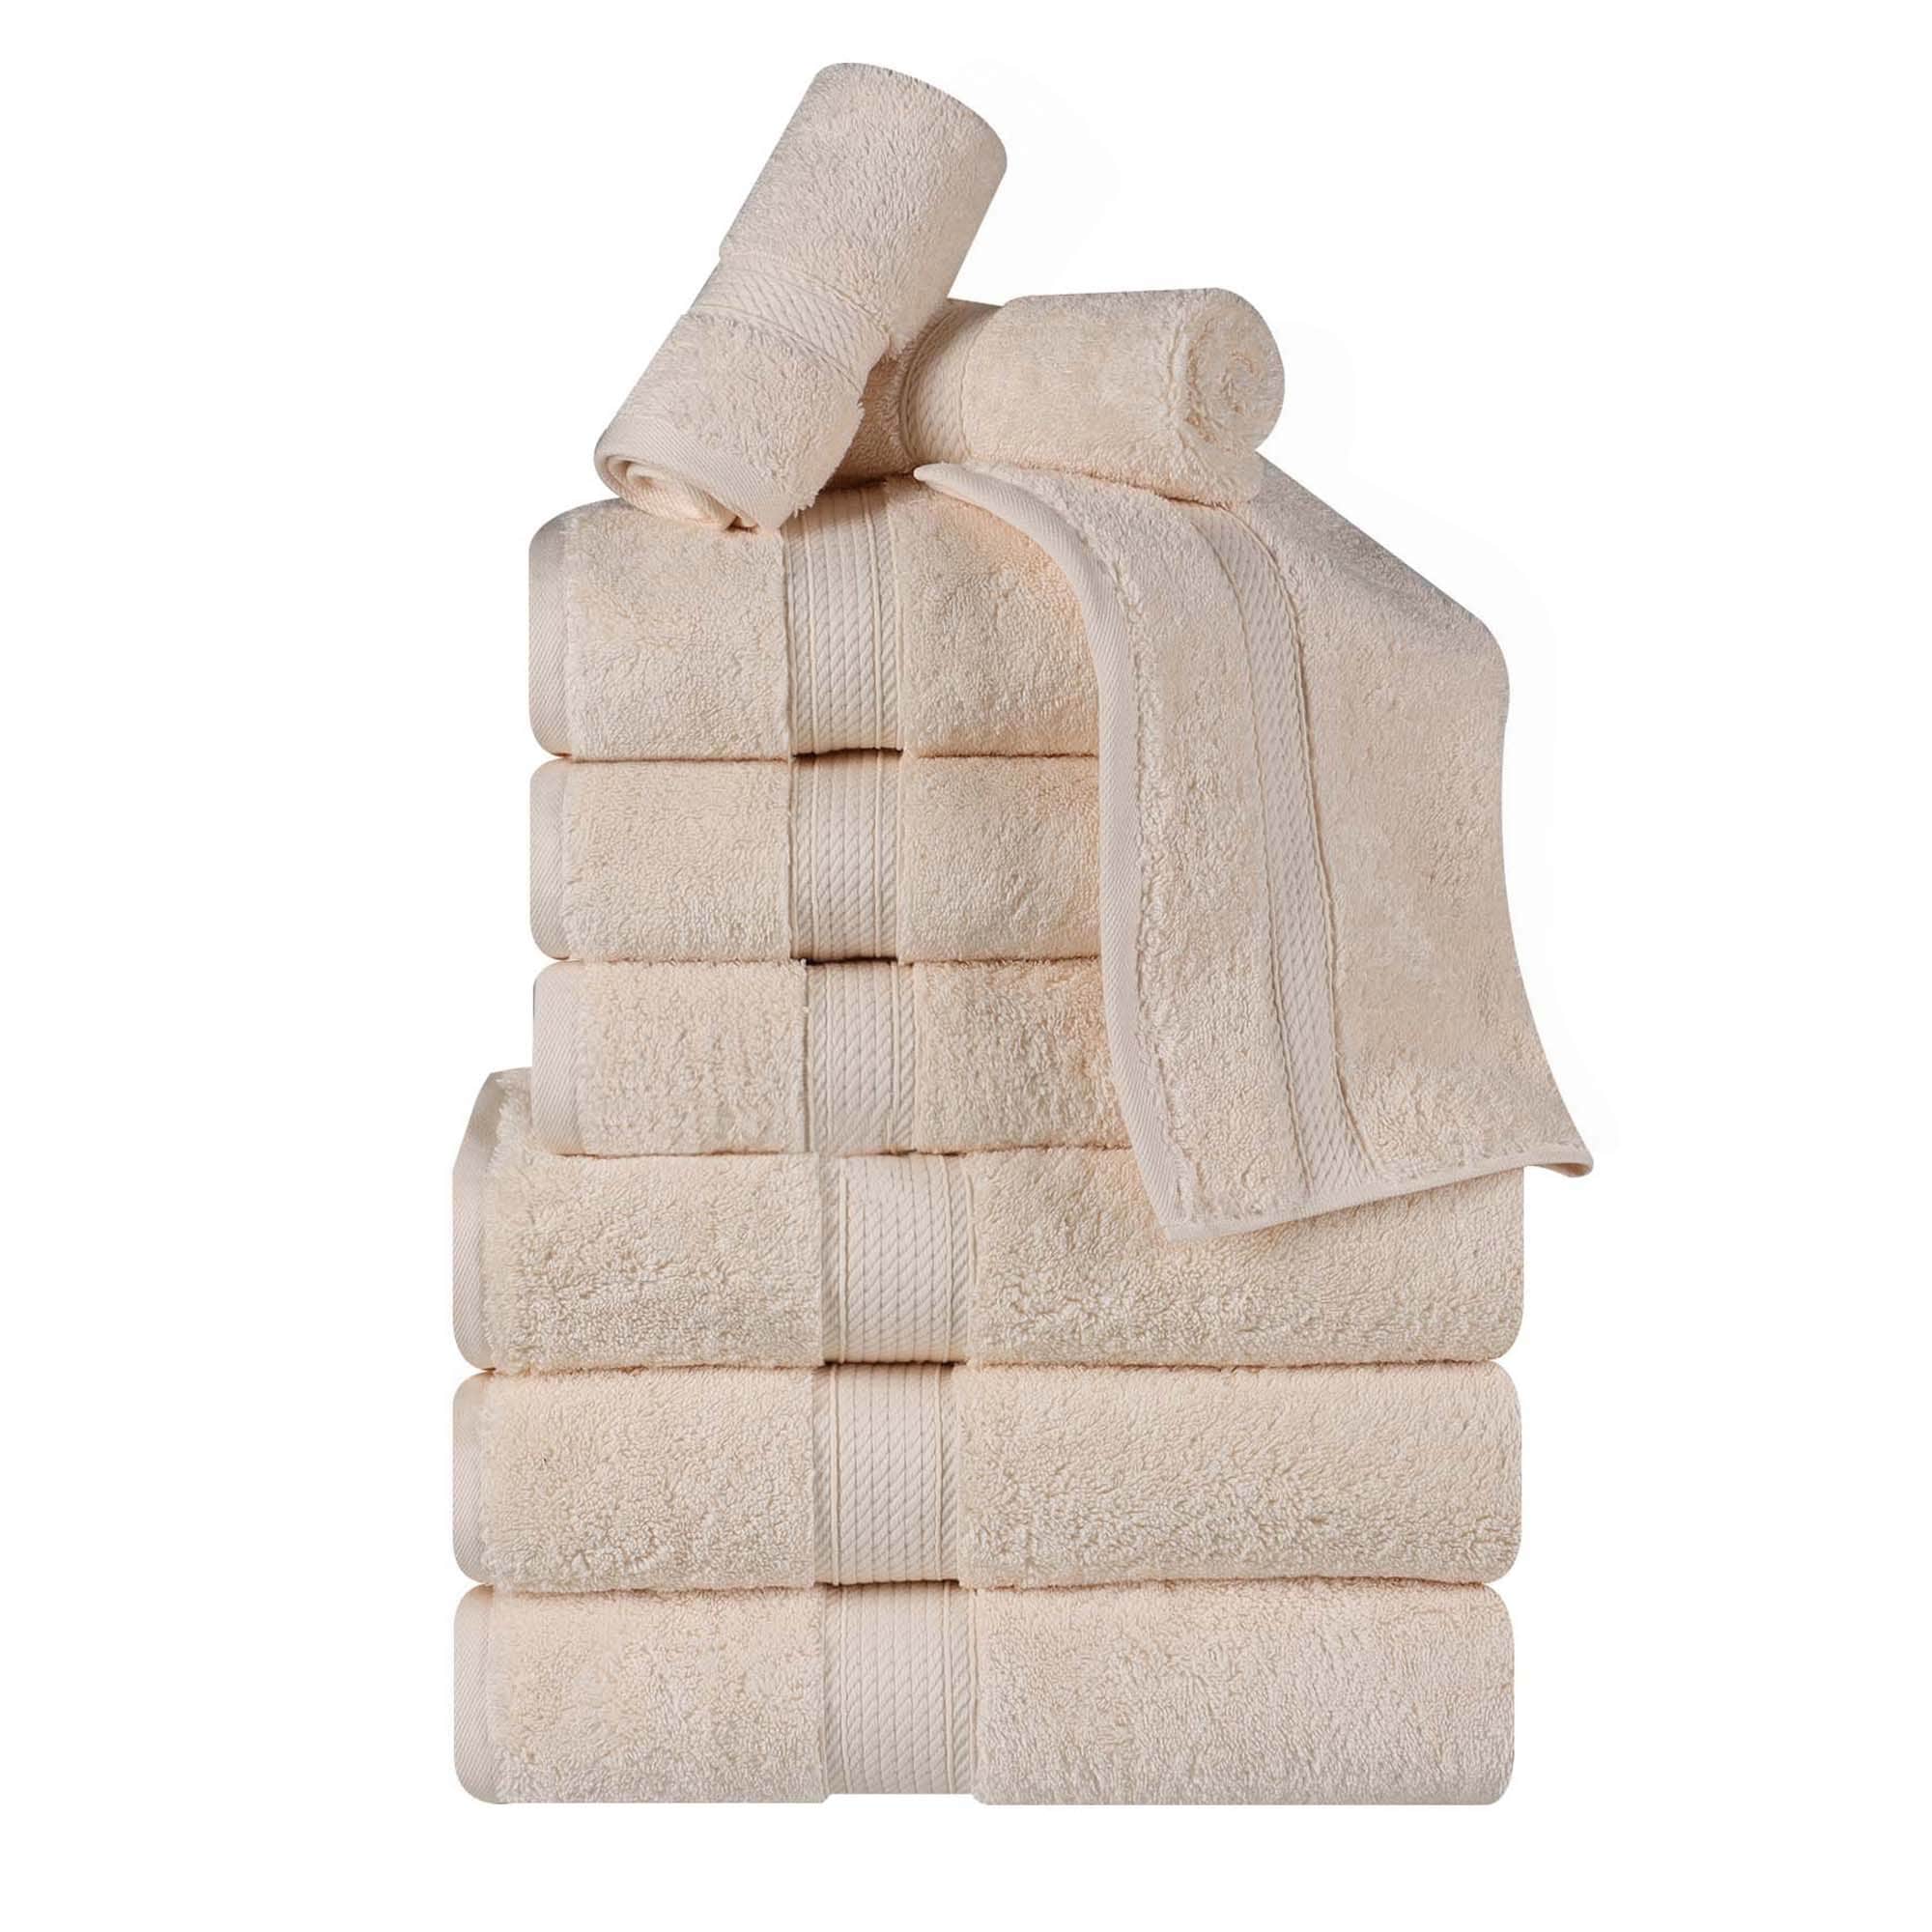 https://ak1.ostkcdn.com/images/products/is/images/direct/bc5bacfccda9807c7d34133c5466ff834ab02eeb/Superior-Madison-Egyptian-Cotton-Heavyweight-Luxury-9-Piece-Towel-Set.jpg